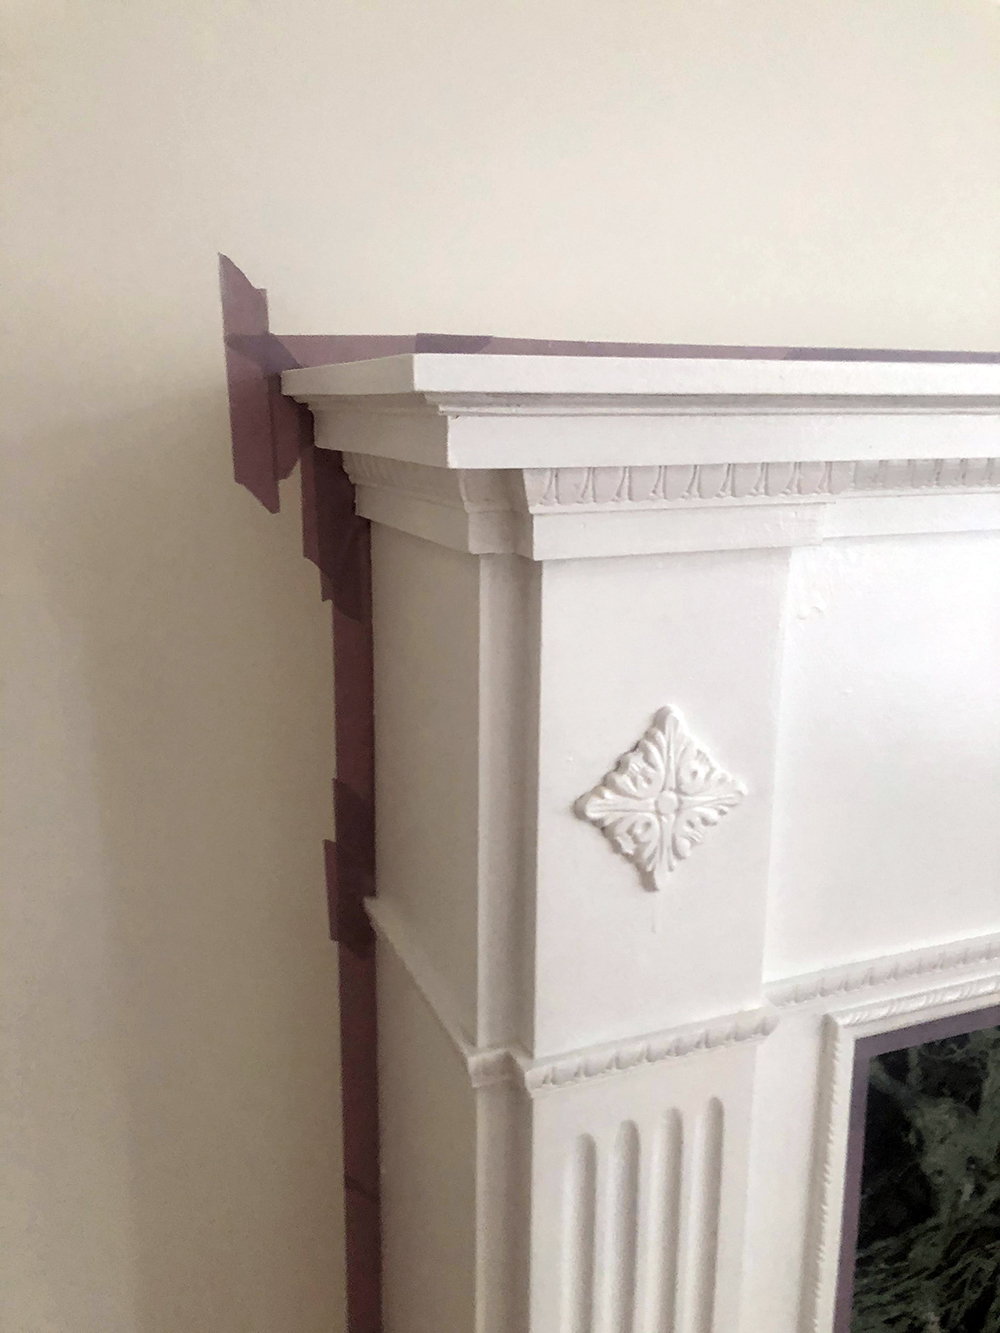 Painter's tape applied to fireplace